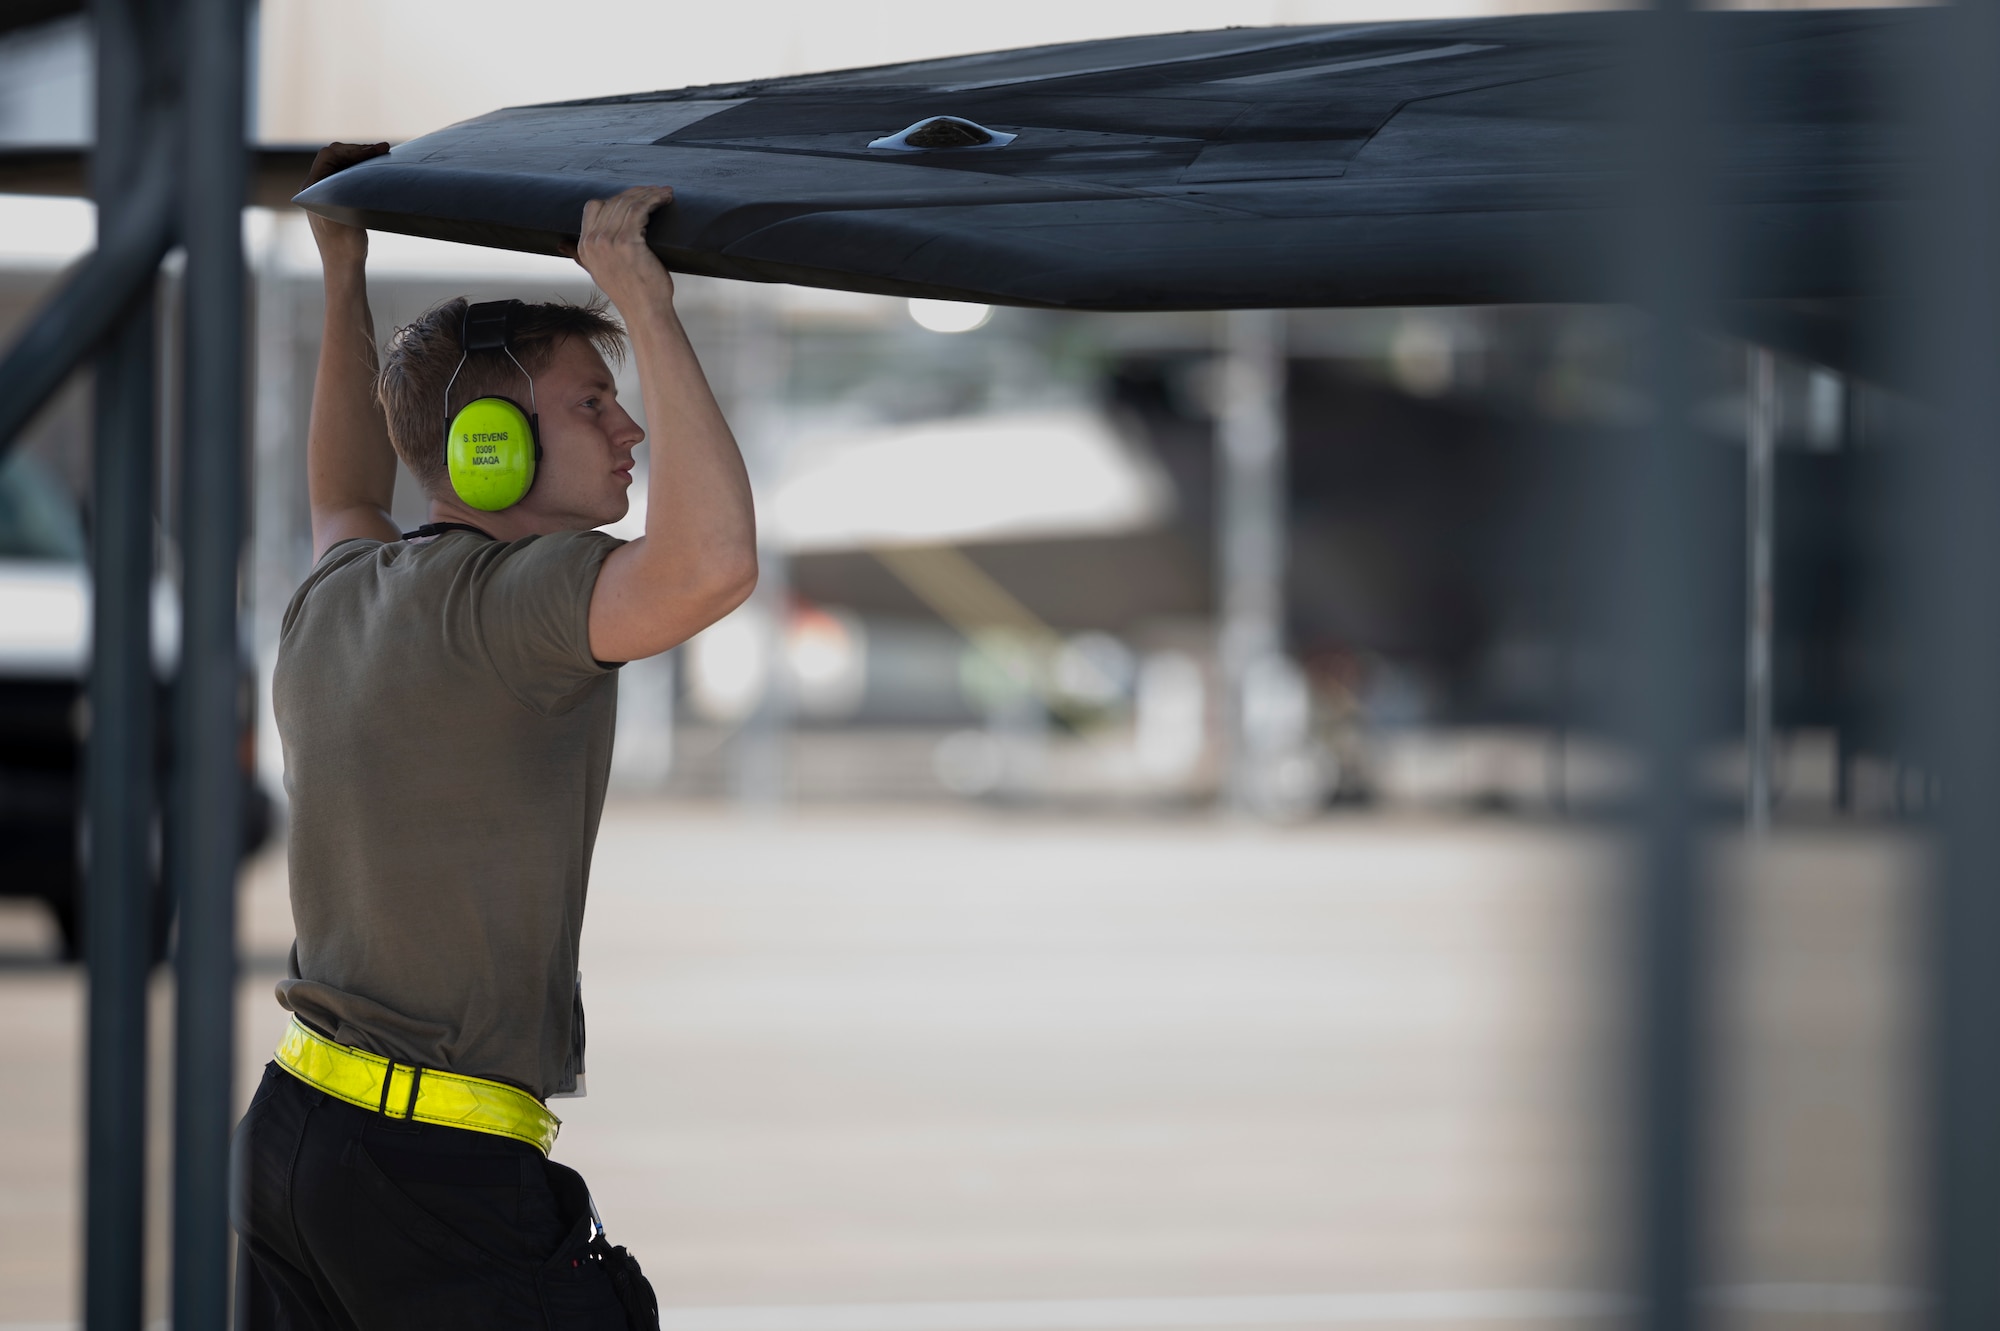 Crew chief inspects the wing of an aircraft